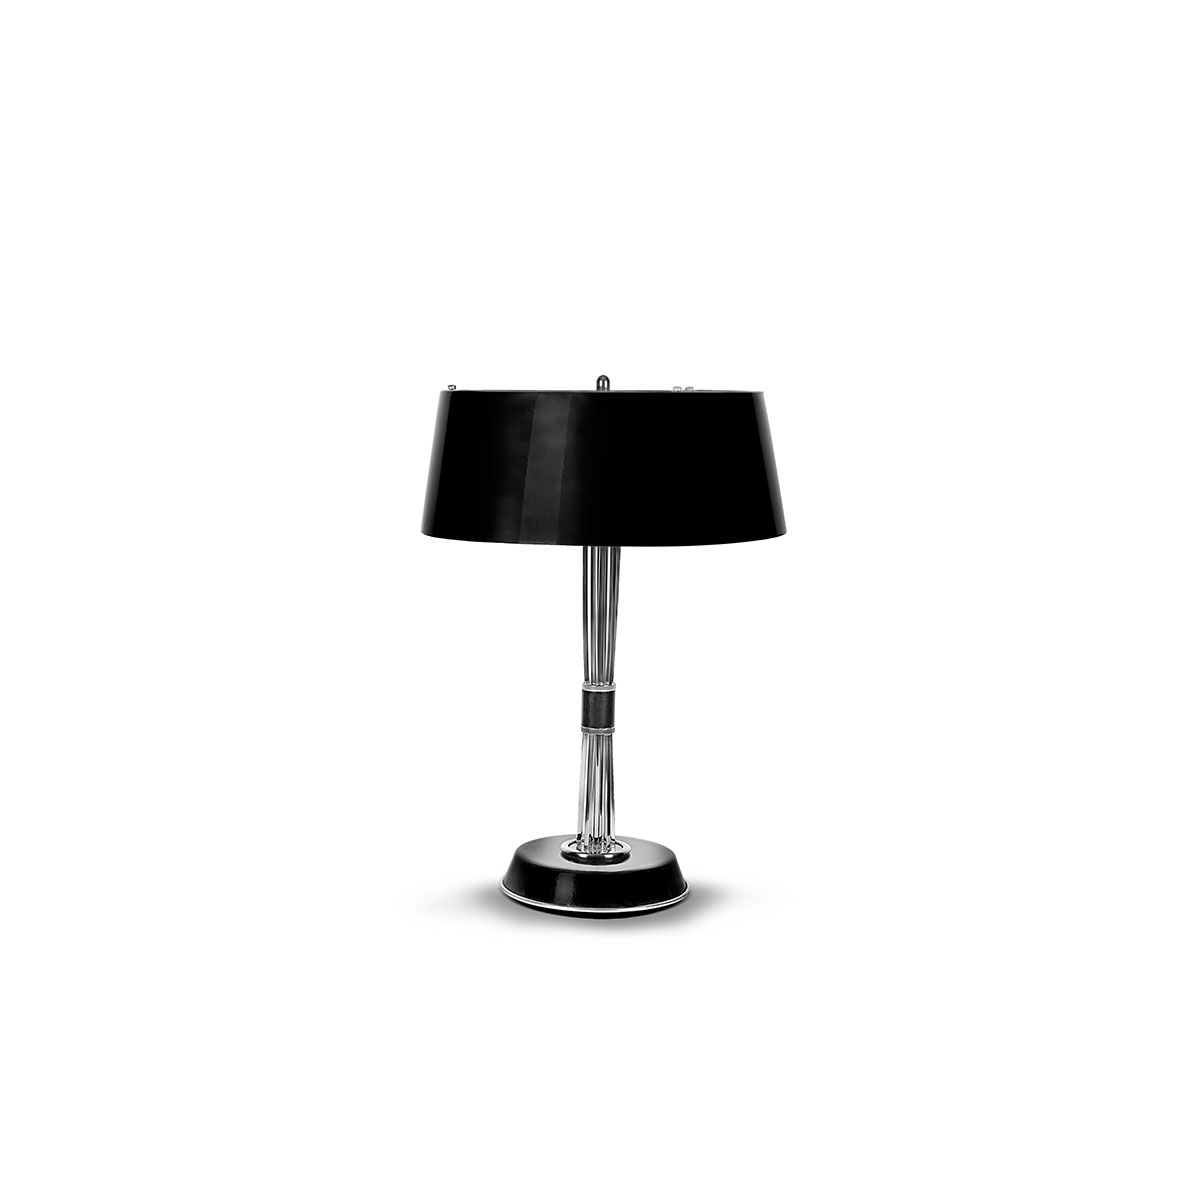 MILES TABLE LAMP